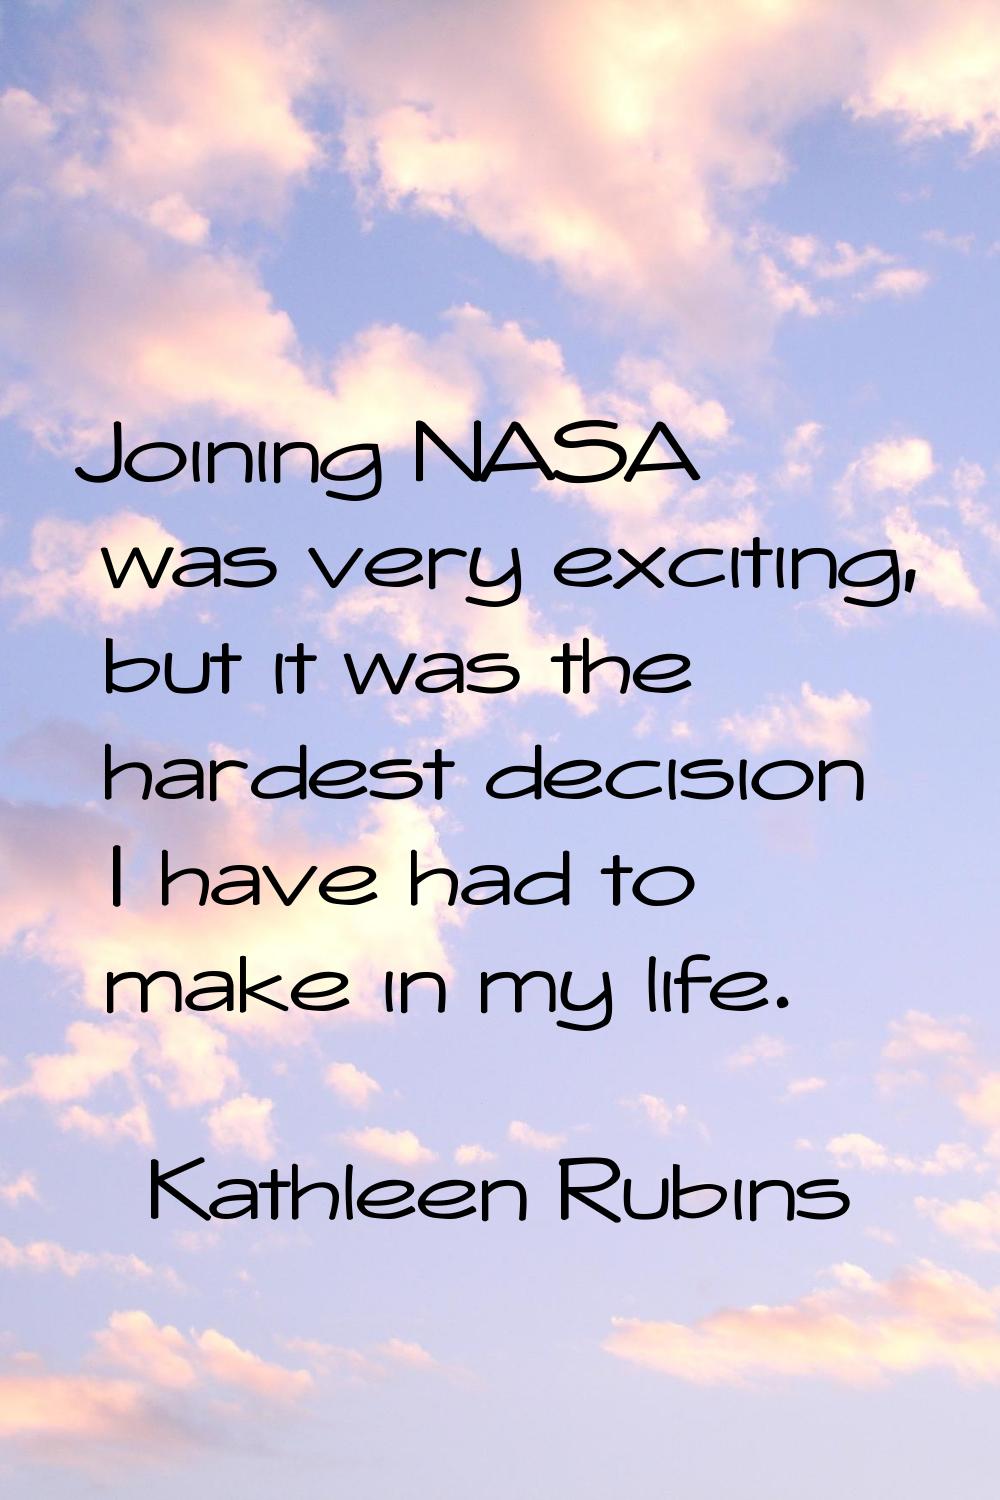 Joining NASA was very exciting, but it was the hardest decision I have had to make in my life.